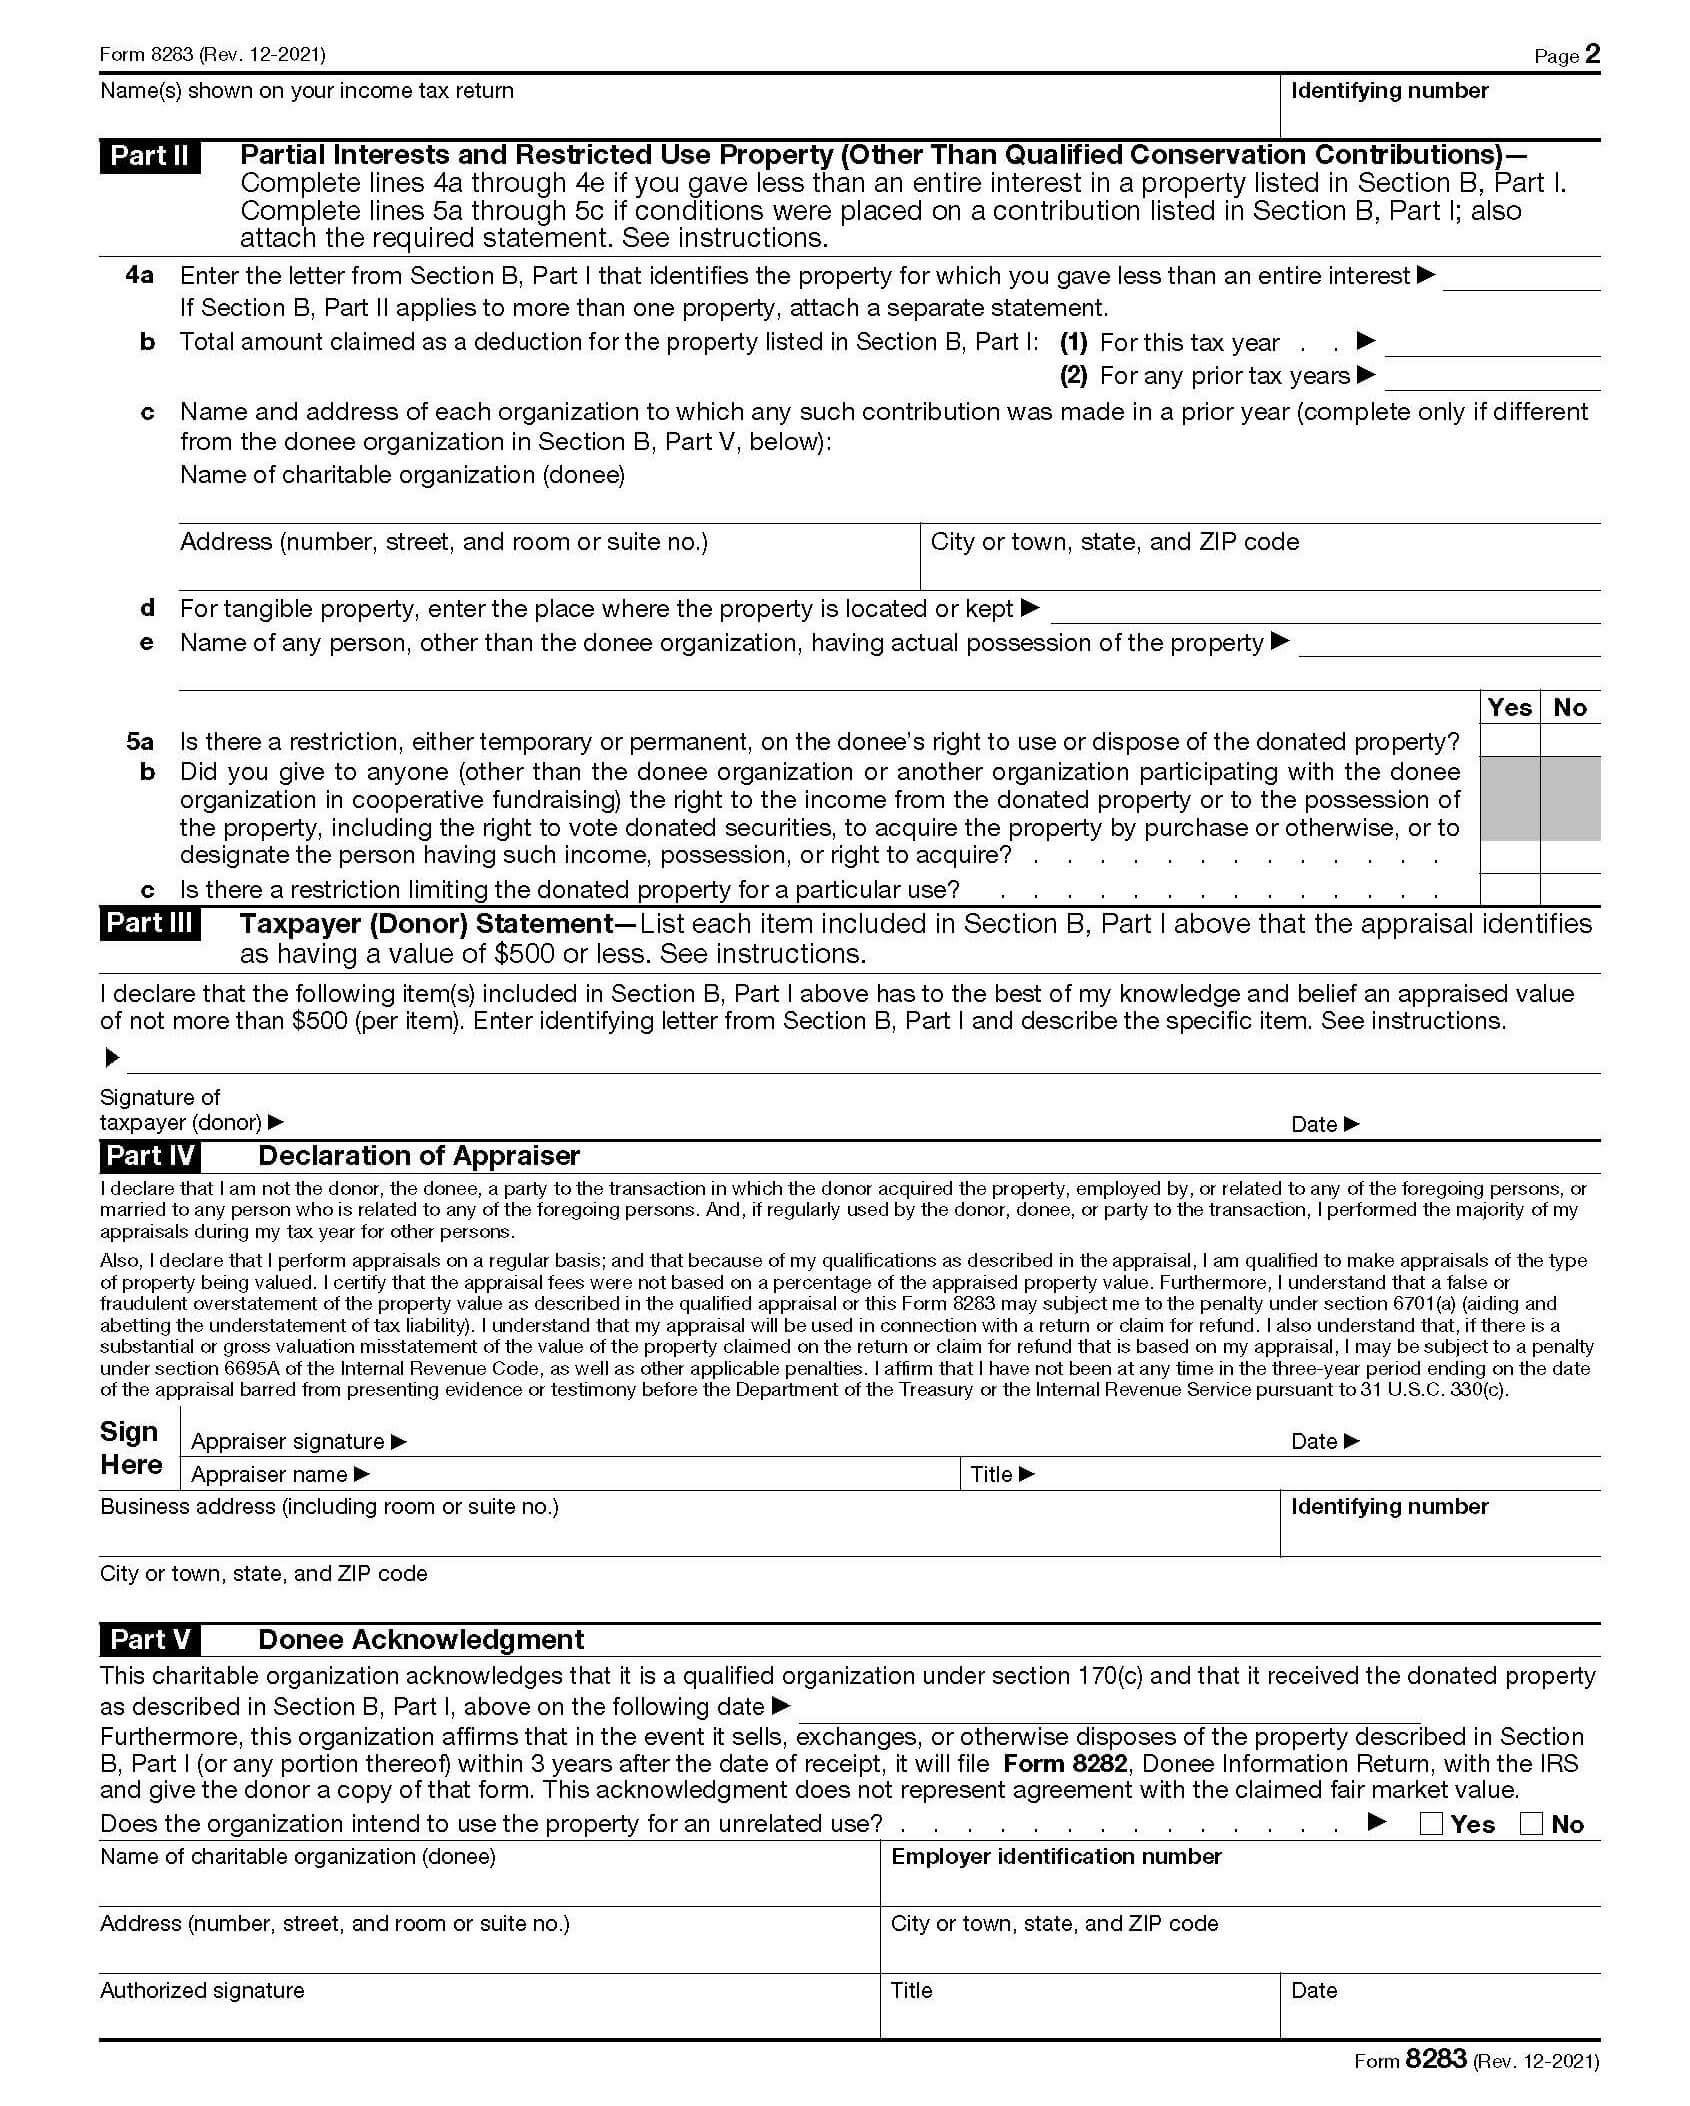 irs form 8283 section_b2 example